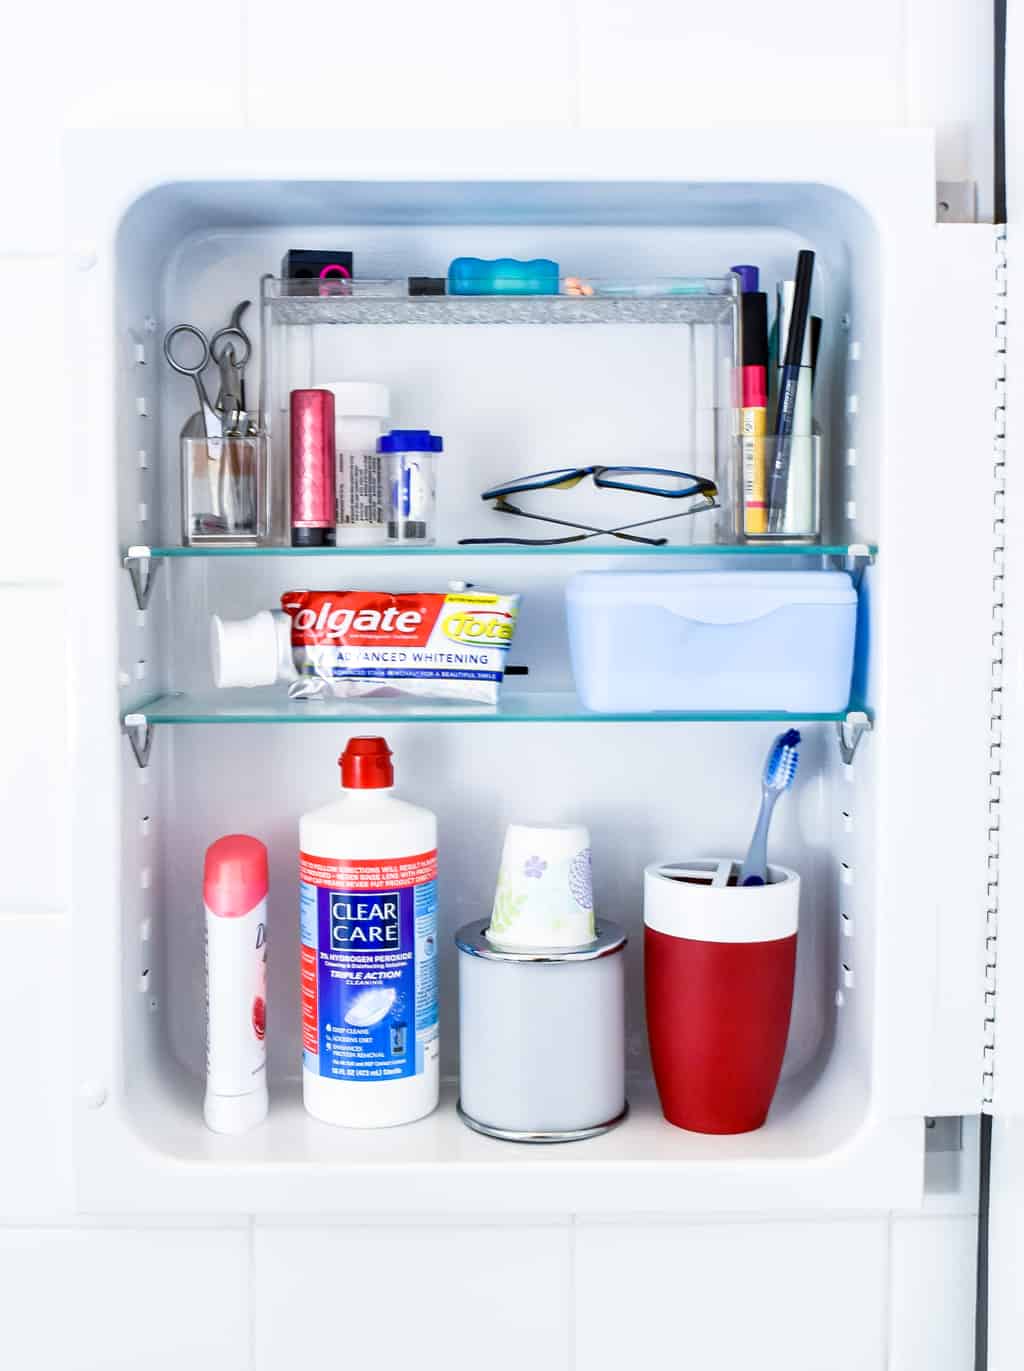 painted metal medicine cabinet with toiletries inside